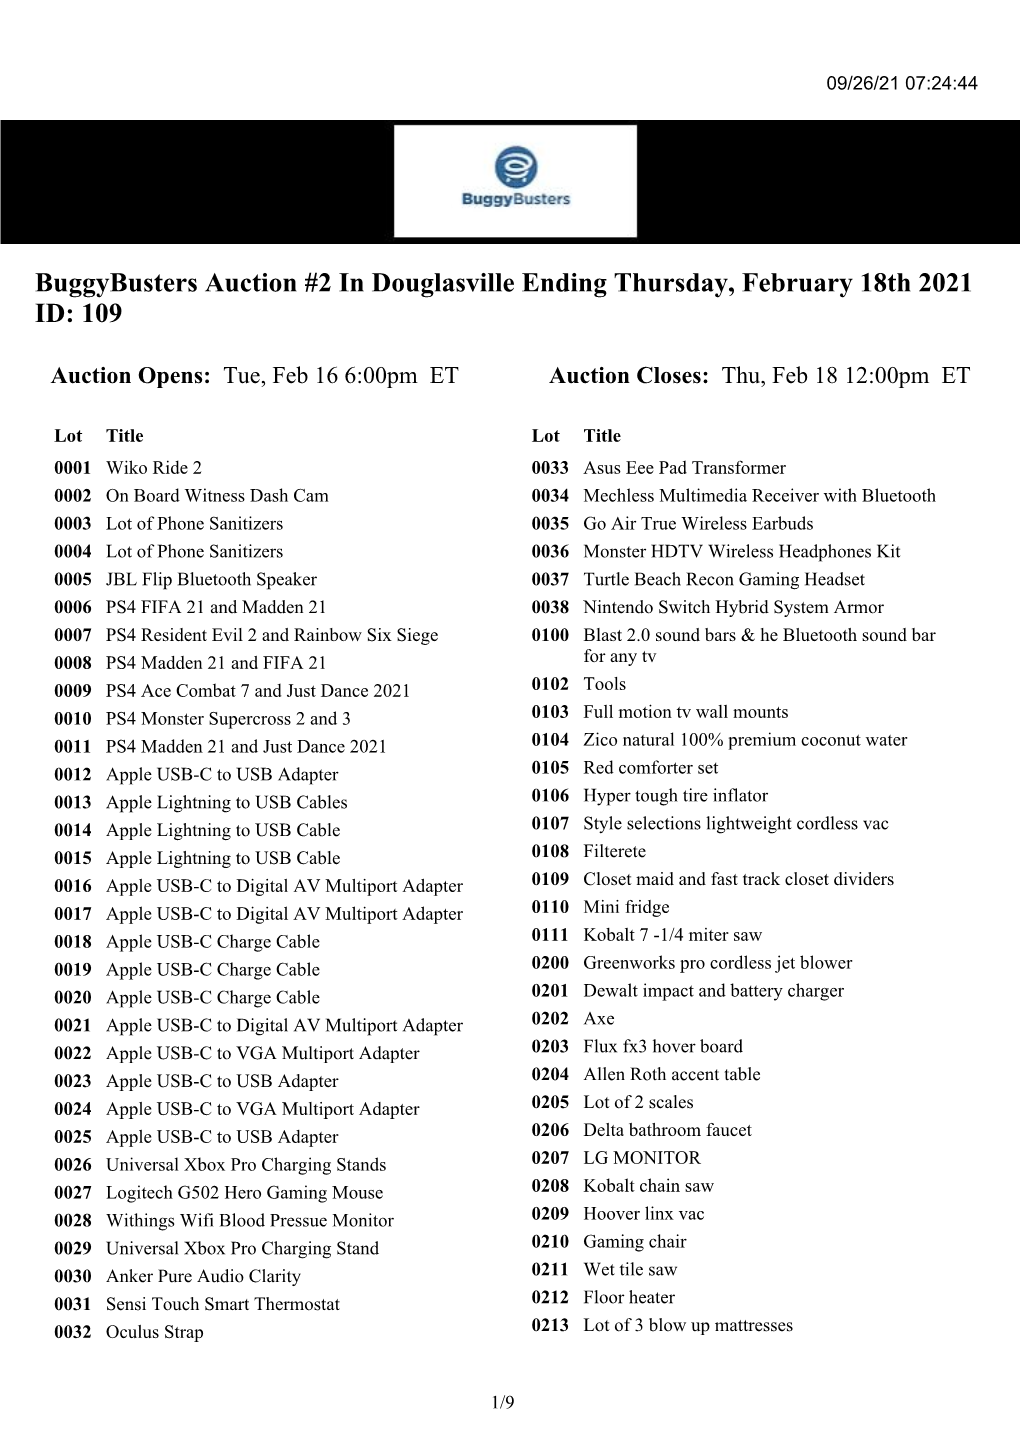 Buggybusters Auction #2 in Douglasville Ending Thursday, February 18Th 2021 ID: 109